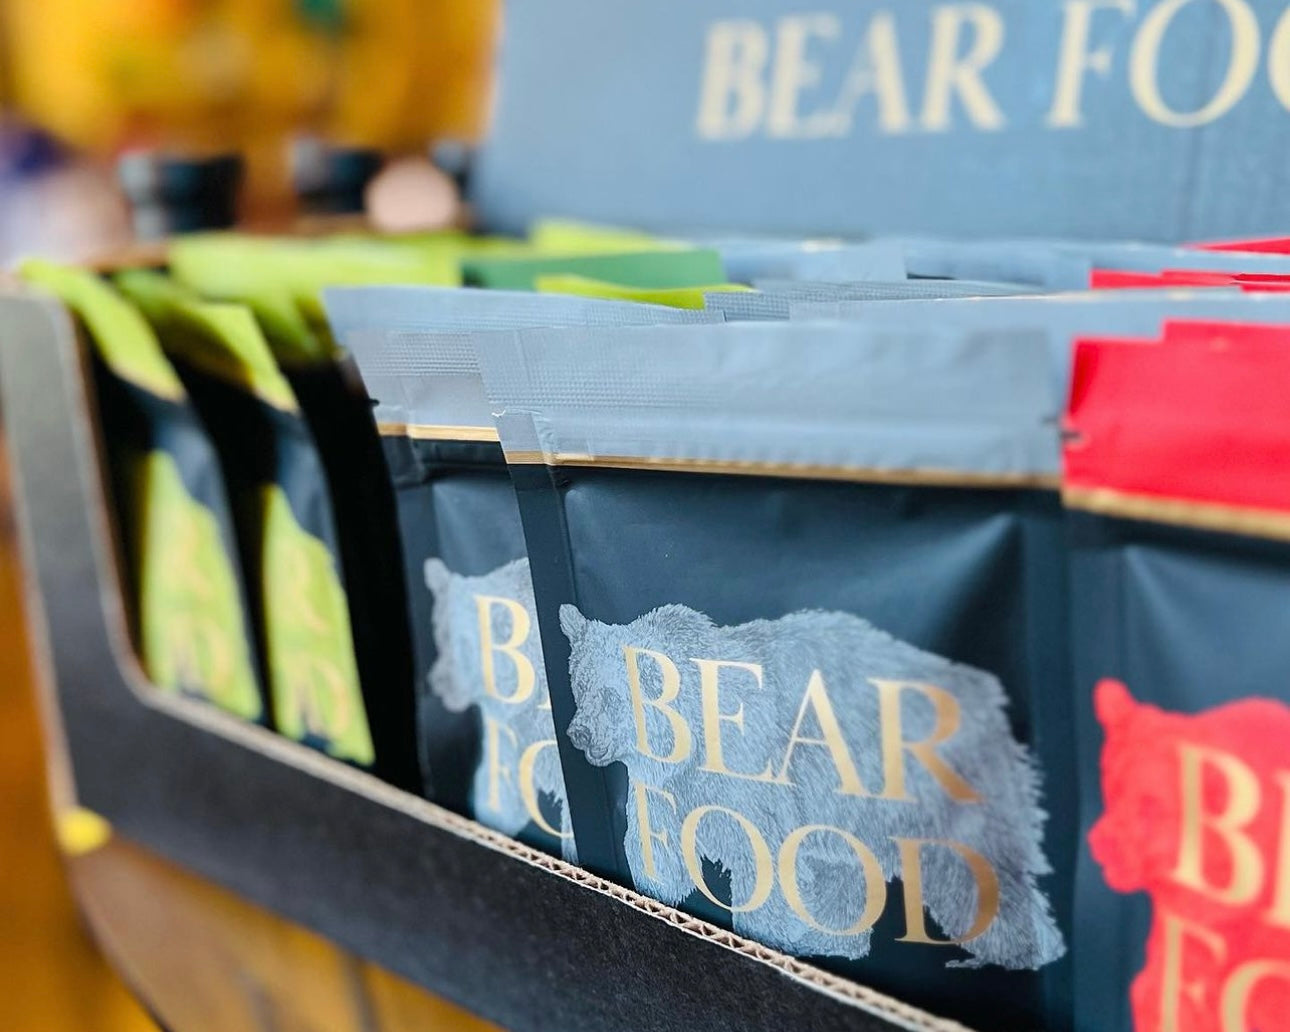 Bear Food Pouch Variety Pack